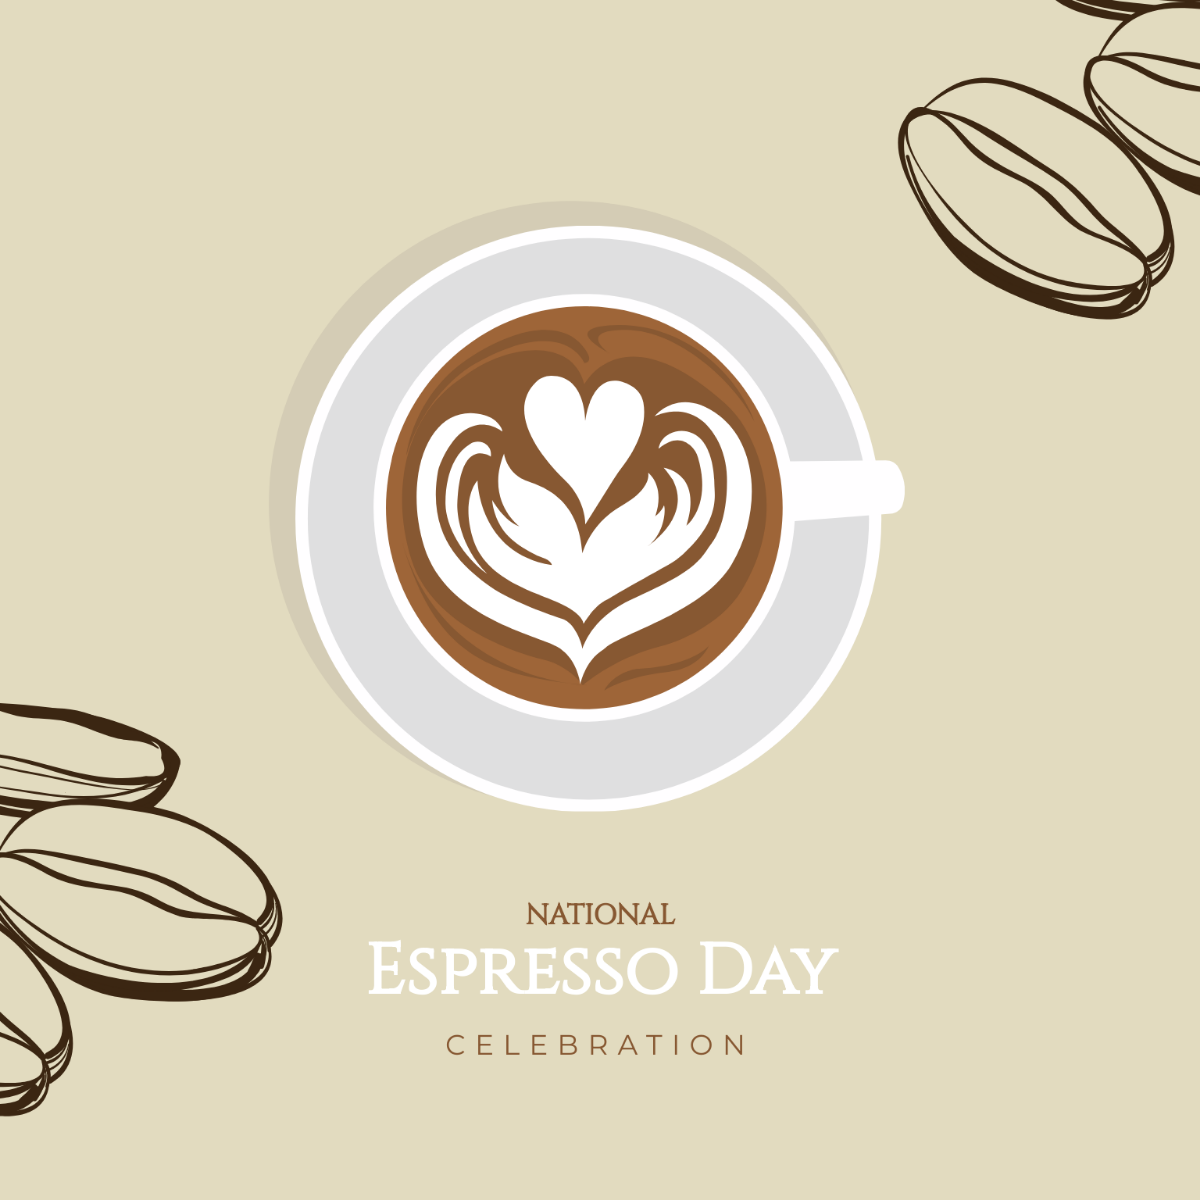 Free National Espresso Day Celebration Vector Template